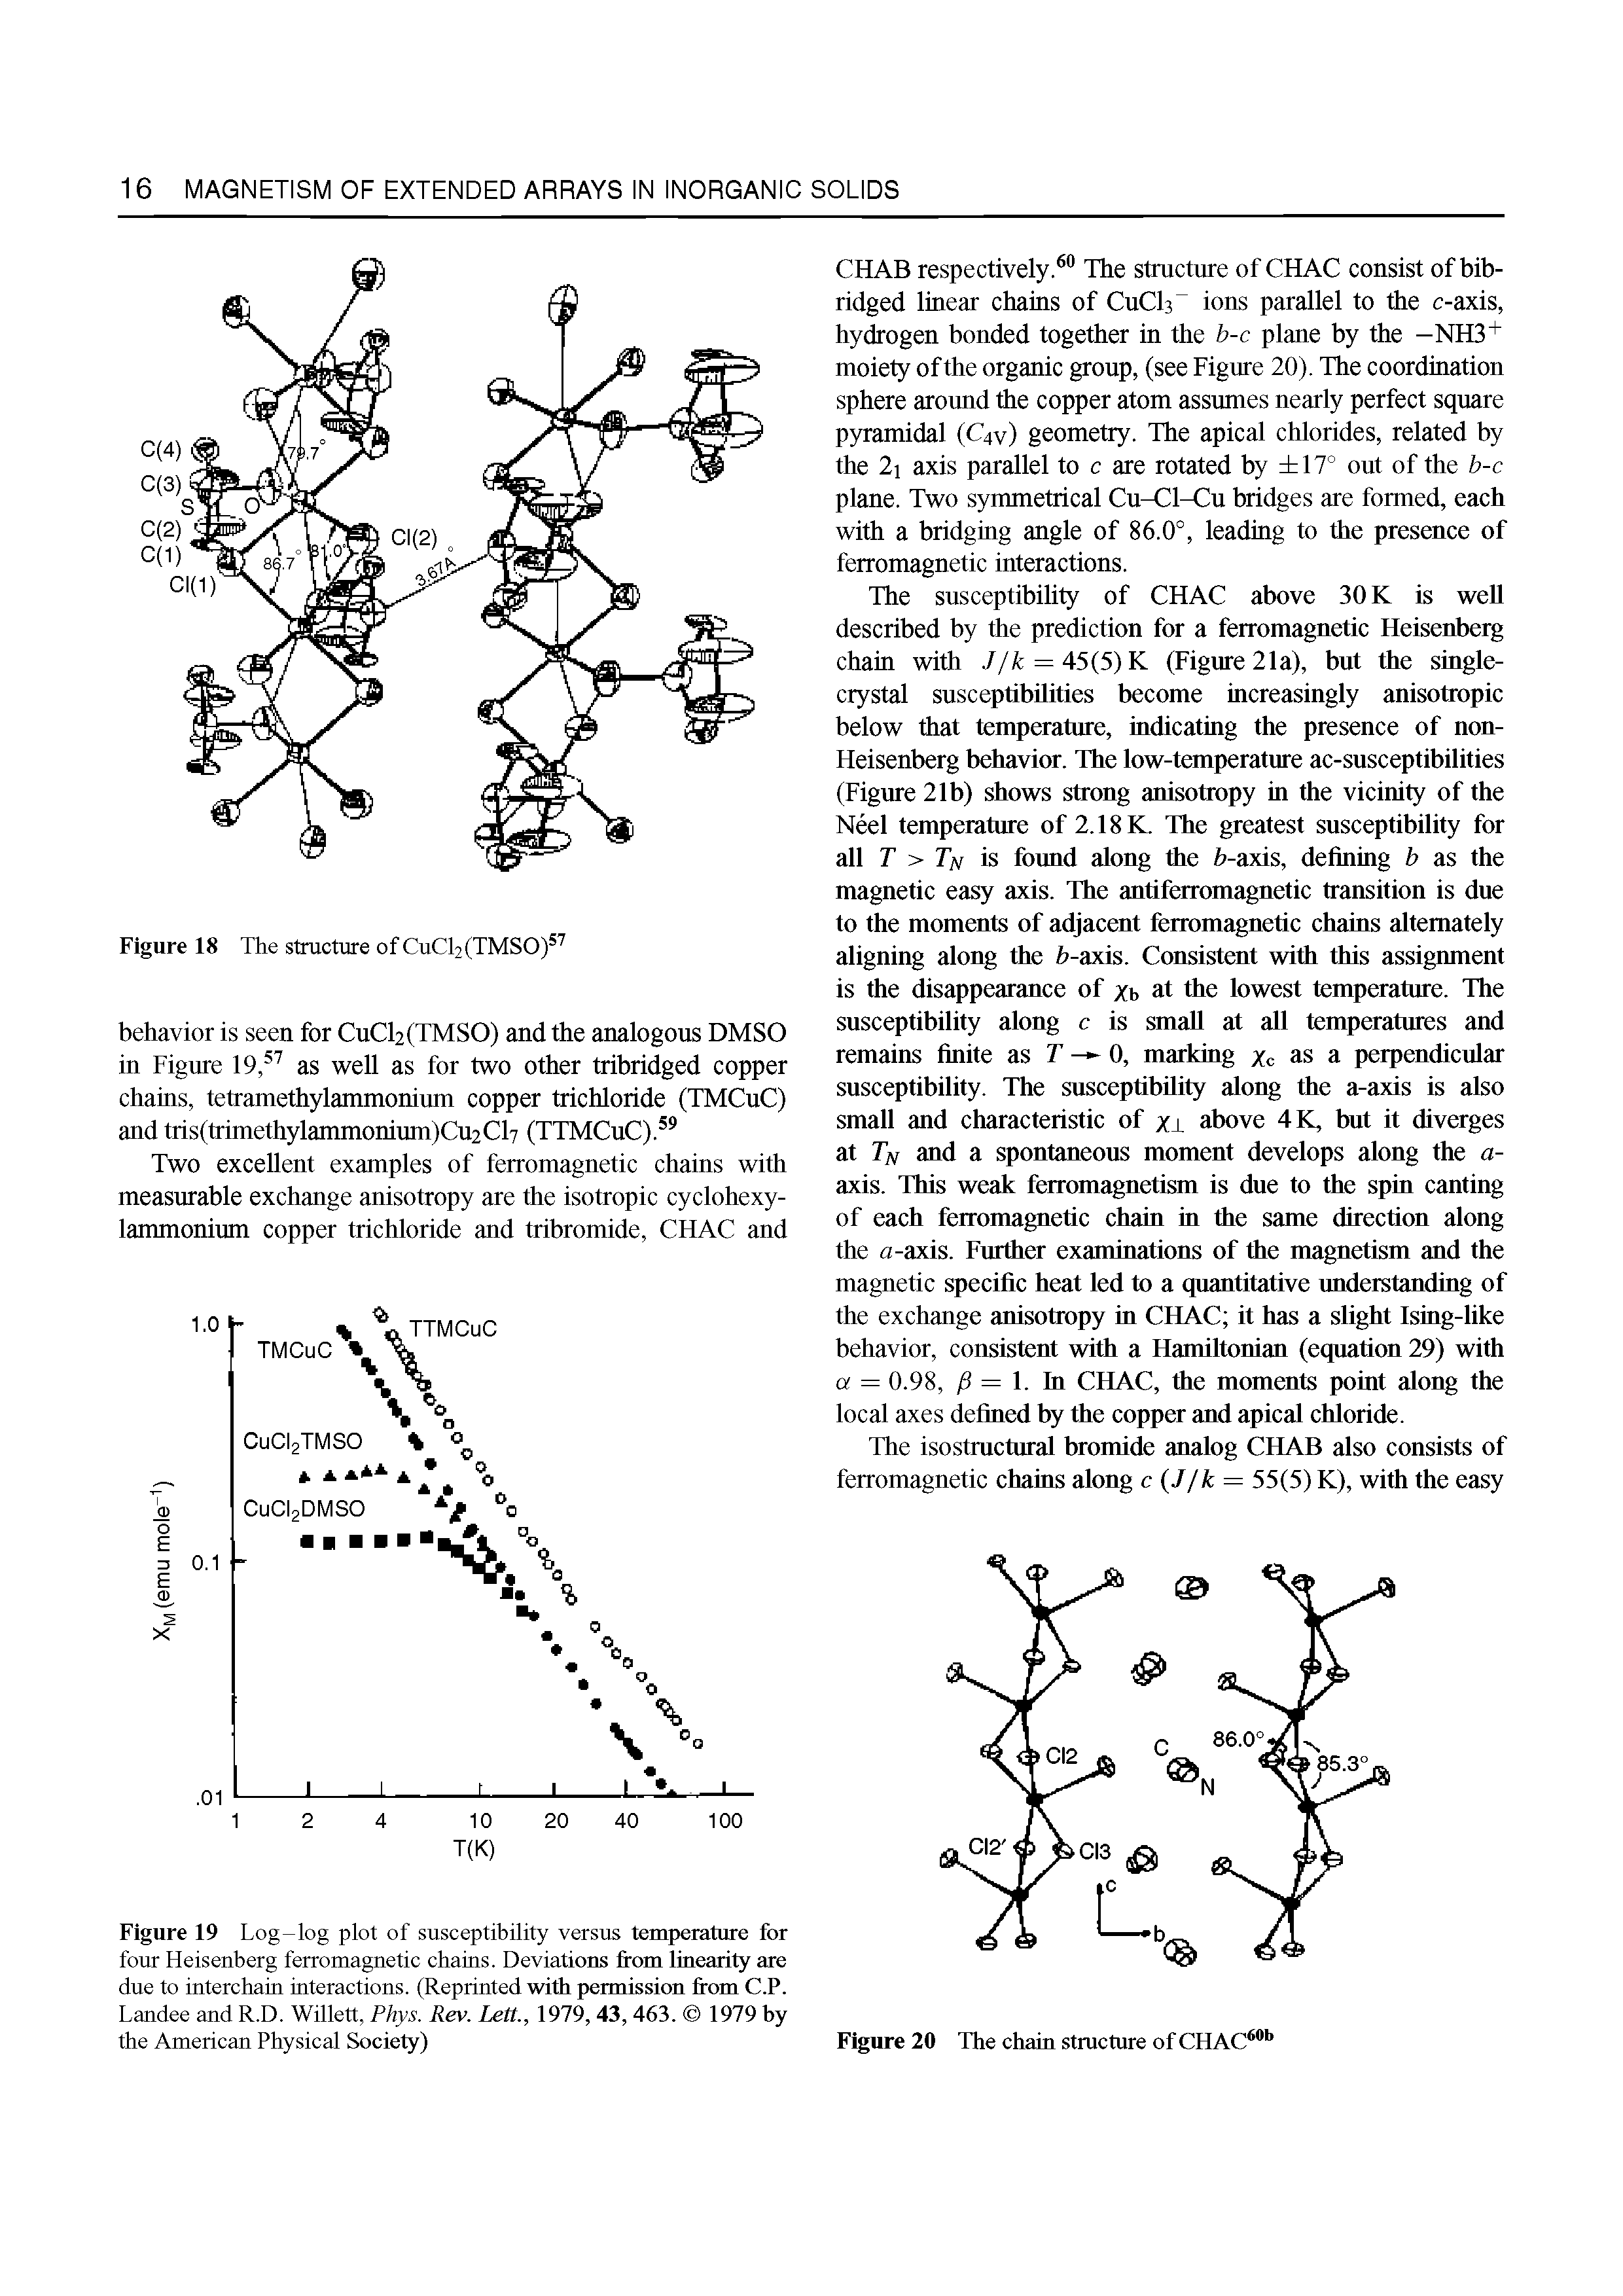 Figure 19 Log-log plot of susceptibility versus temperature for four Heisenberg ferromagnetic chains. Deviations from linearity are due to interchain interactions. (Reprinted with permission from C.P. Landee and R.D. Willett, Phys. Rev. Lett., 1979, 43, 463. 1979 by the American Physical Society)...